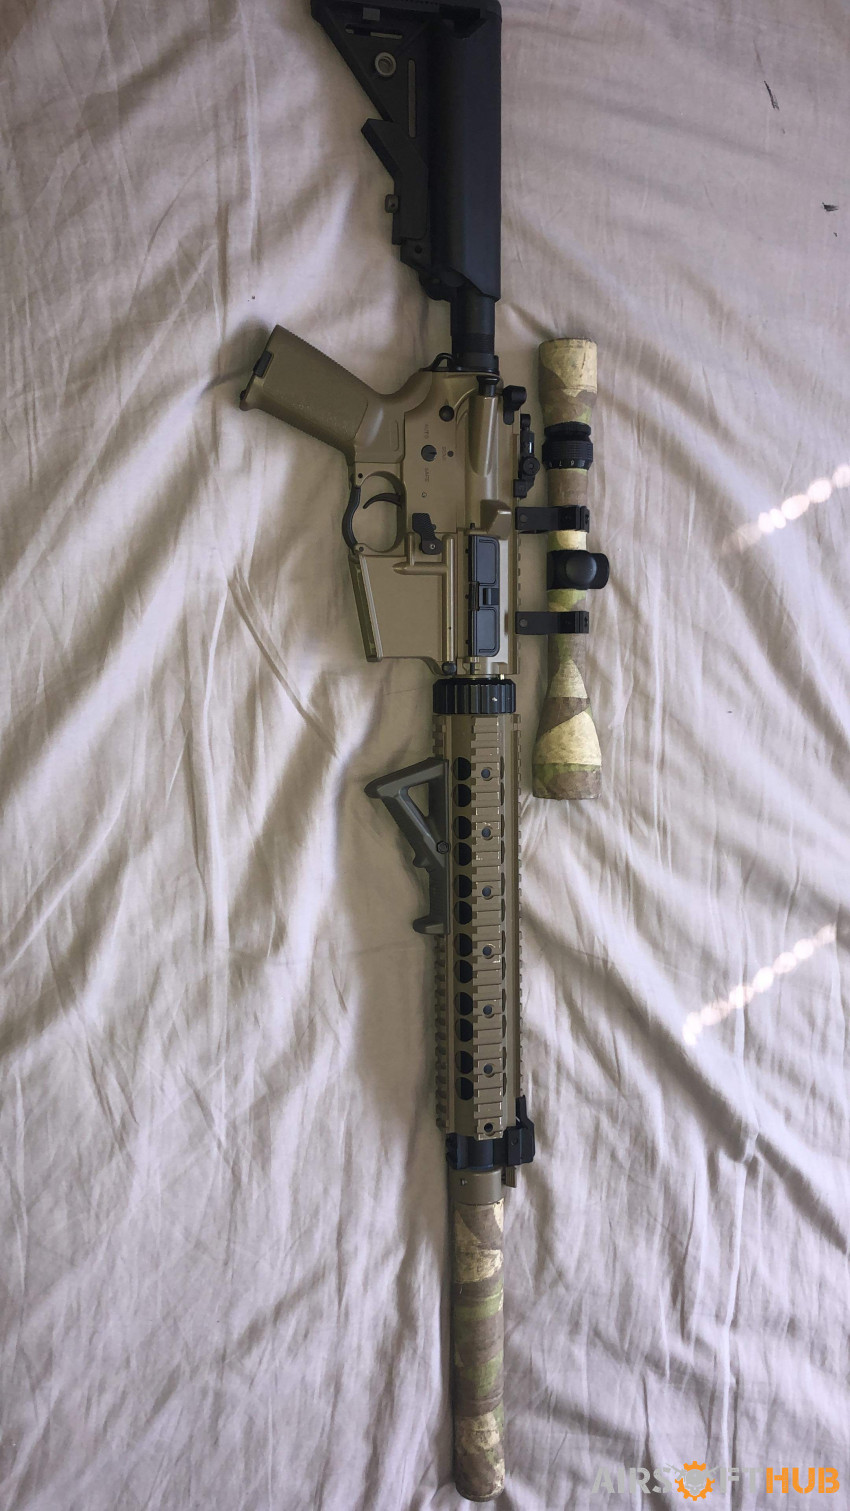 DMR for sale - Used airsoft equipment